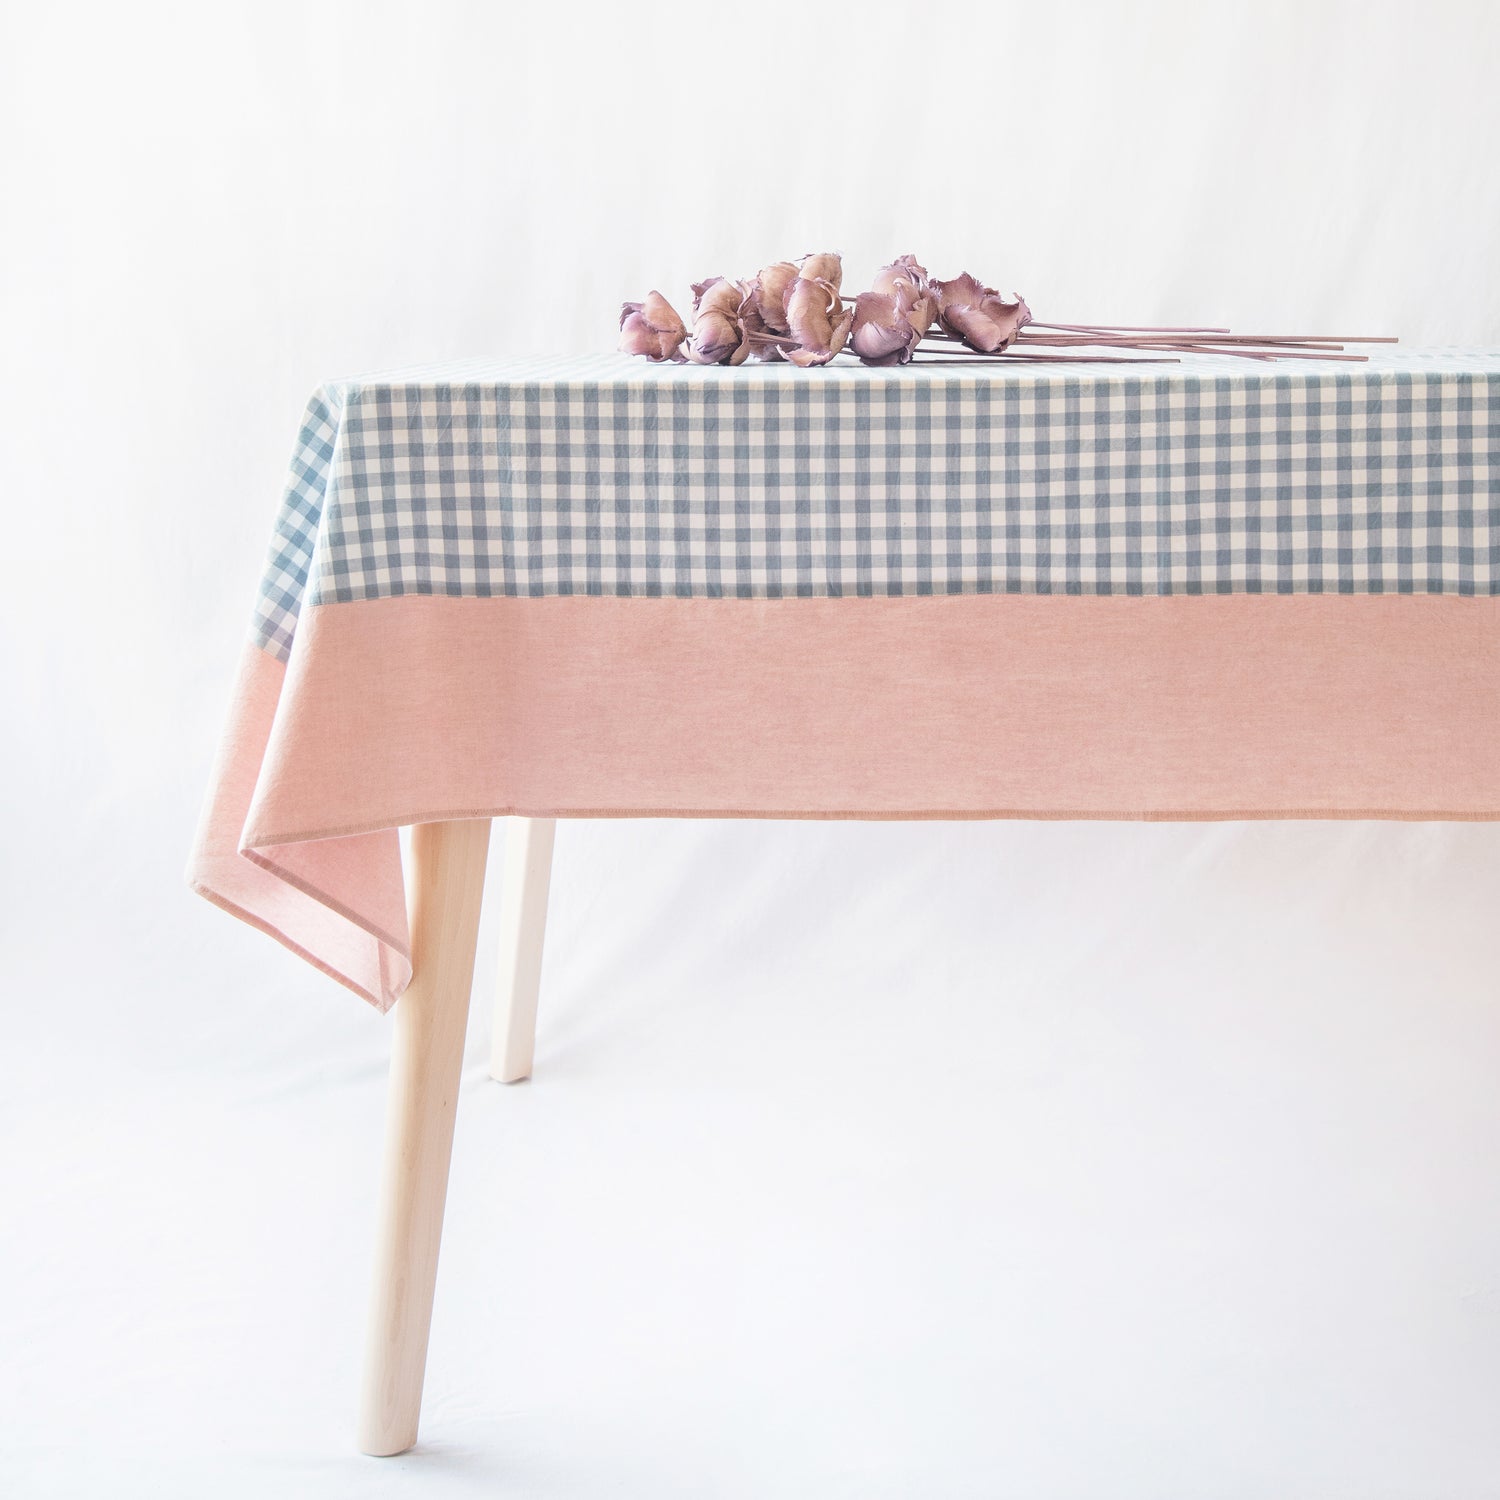 tablecloth gingham plaid buffalo checkered cotton stonewashed blue clay white rectangle